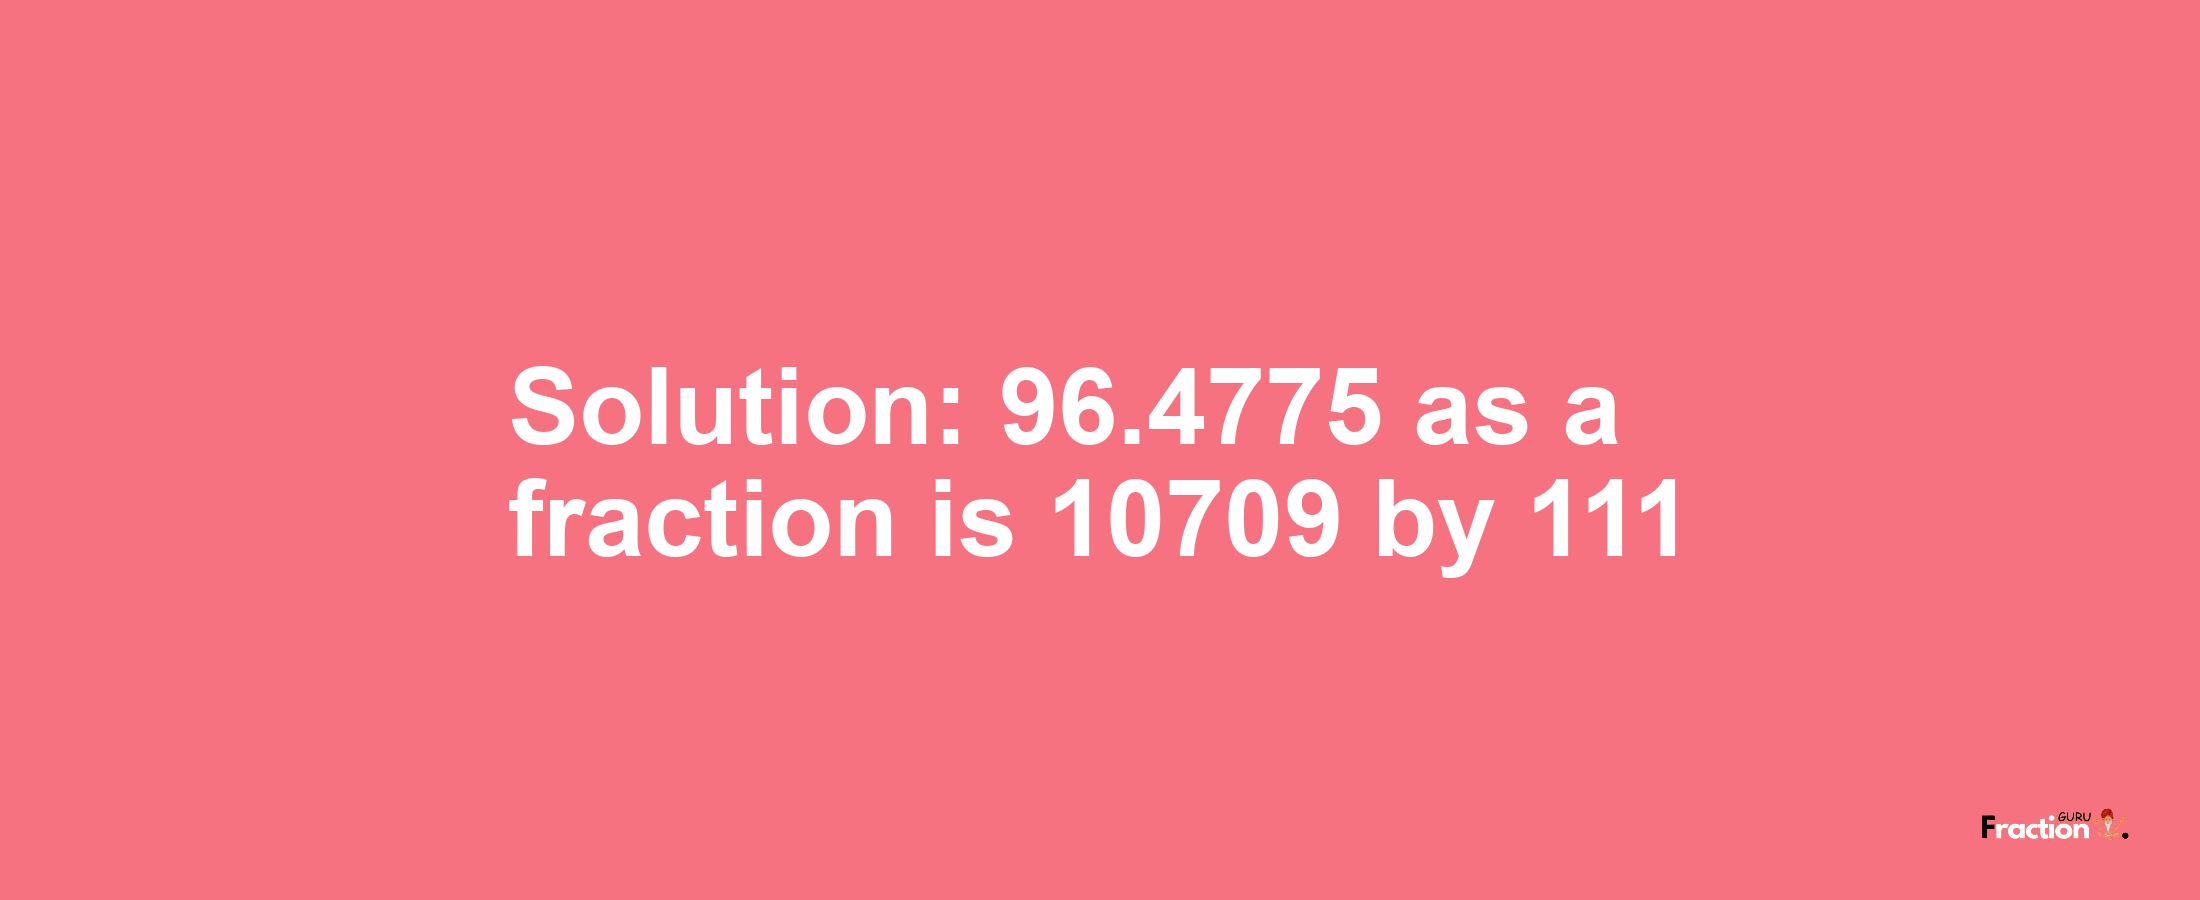 Solution:96.4775 as a fraction is 10709/111